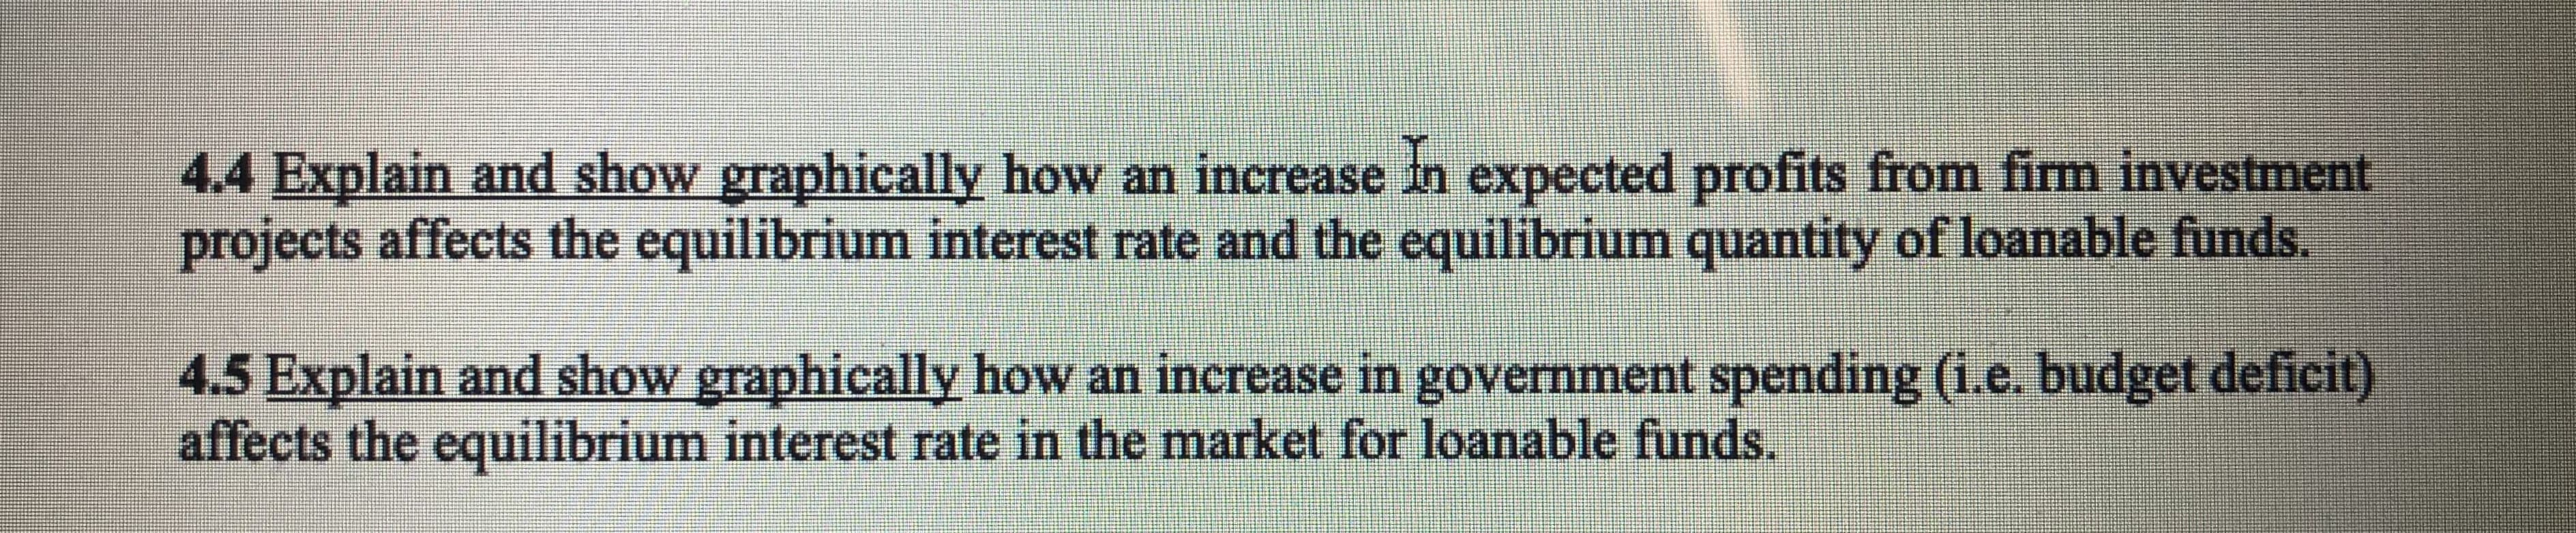 4.4 Explain and show graphically how an increase in expected profits from firm investment
projects affects the equilibrium interest rate and the equilibrium quantity of loanable funds.
4.5 Explain and show graphically how an increase in government spending (i.e. budget deficit)
affects the equilibrium interest rate in the market for loanable funds.
